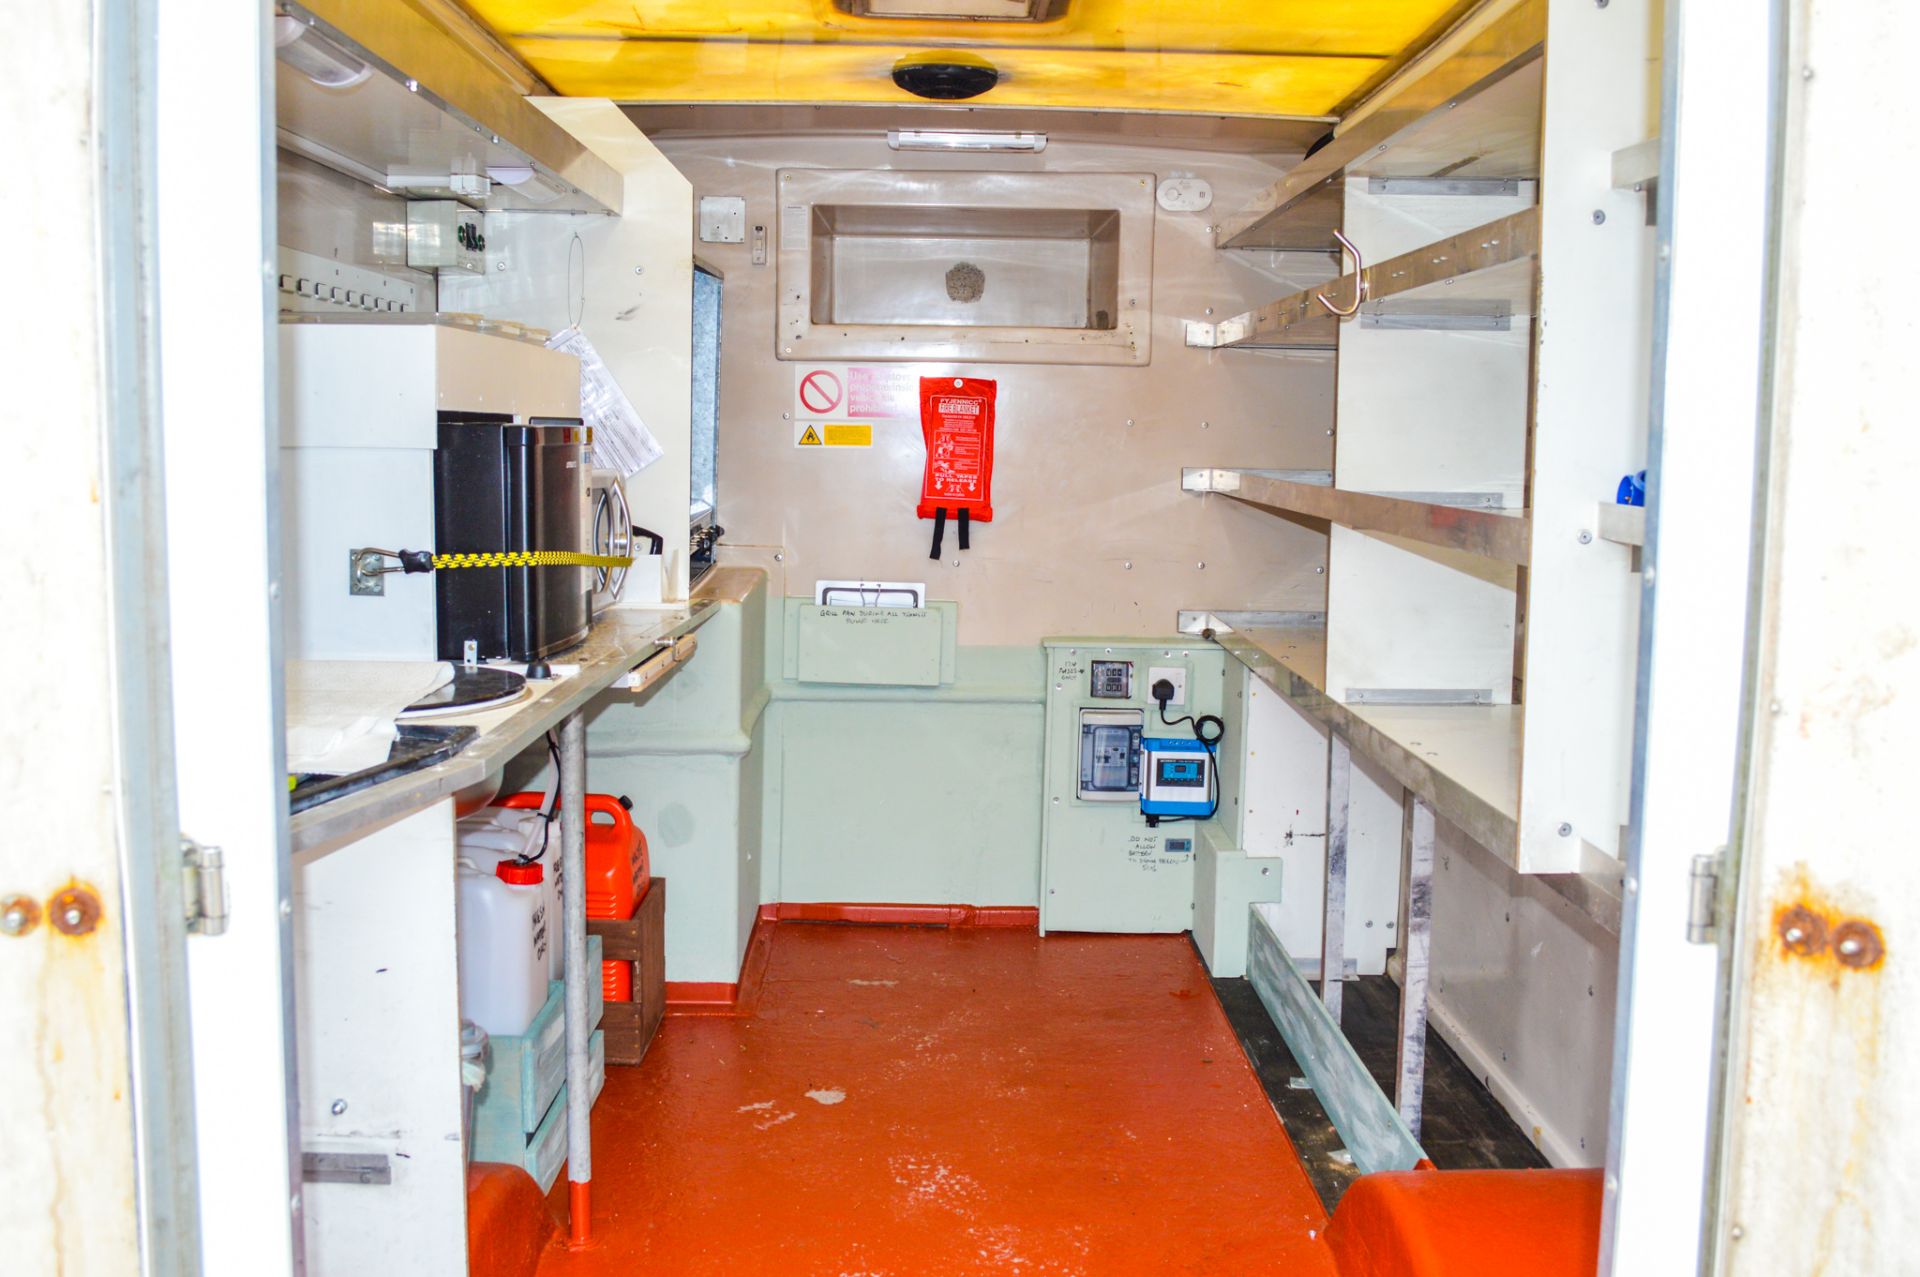 Mobile welfare unit Comprising of: Canteen and cooking area and gas bottle storage compartment c/ - Image 5 of 10